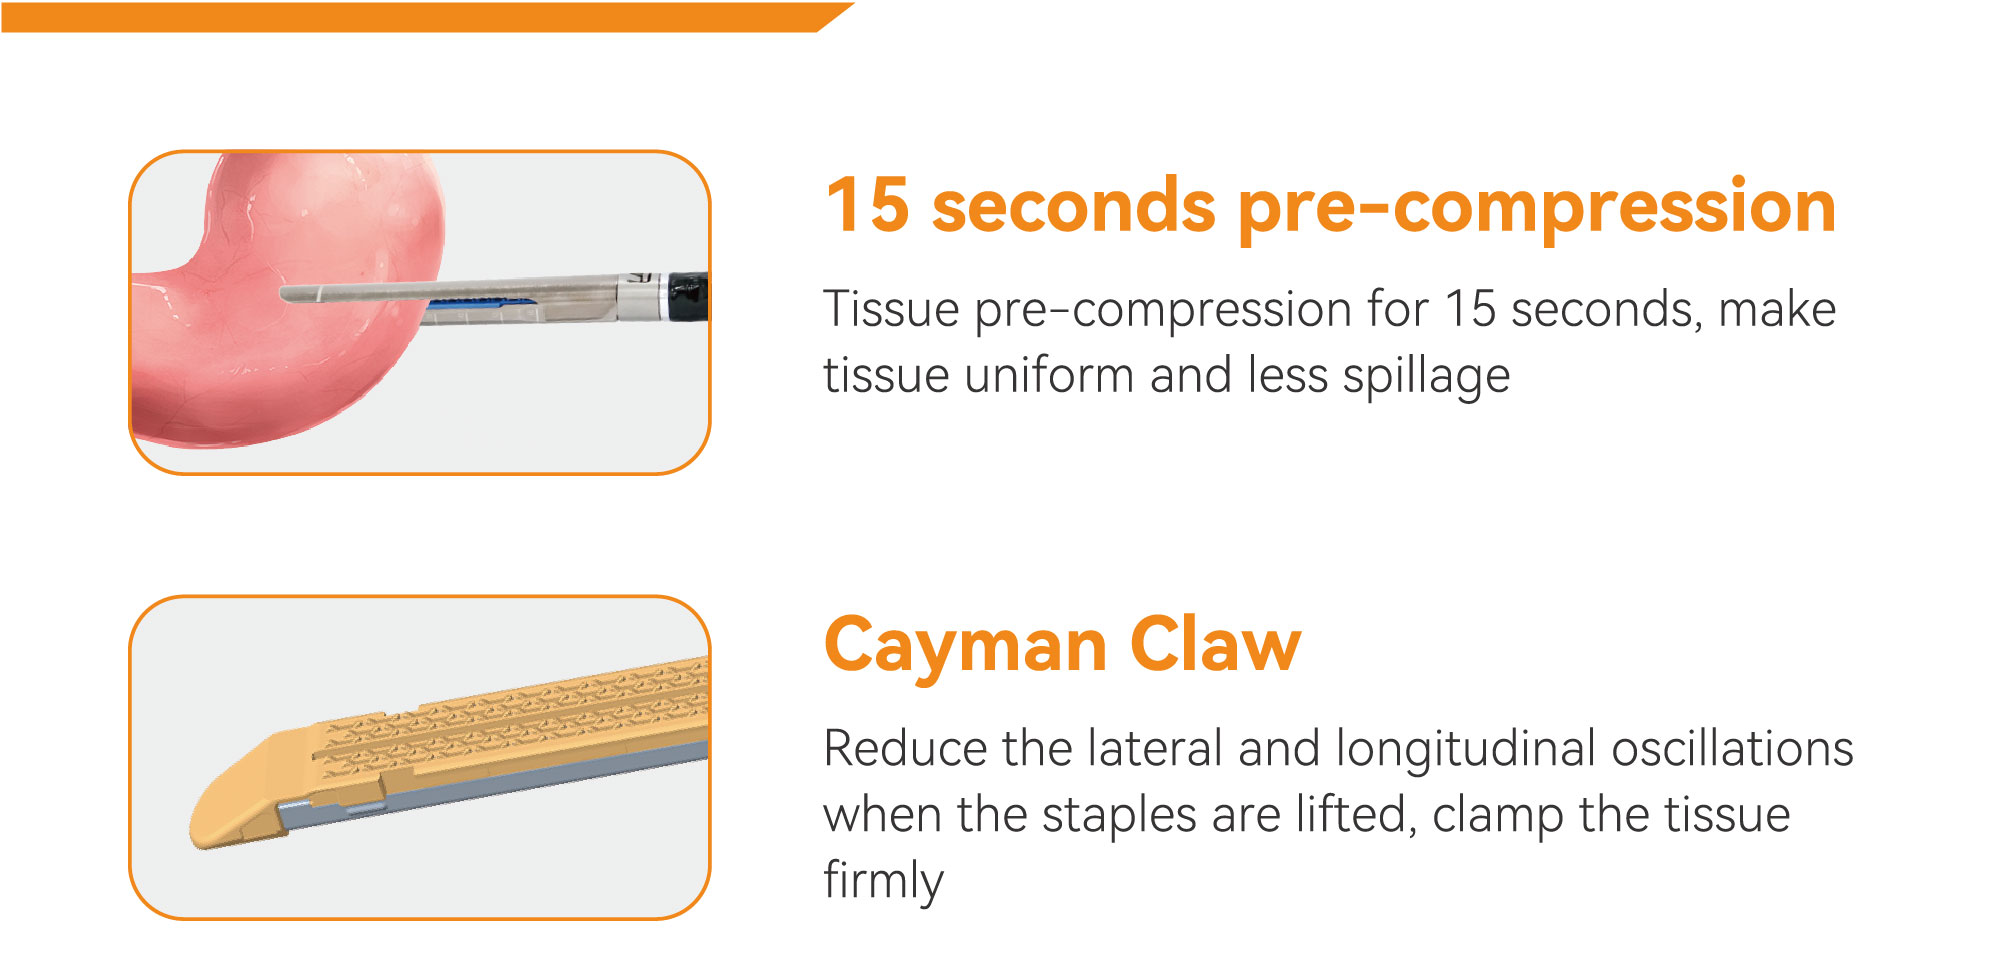 Disposable Stapler Reloads With Cayman Claw-Miconvey Medical